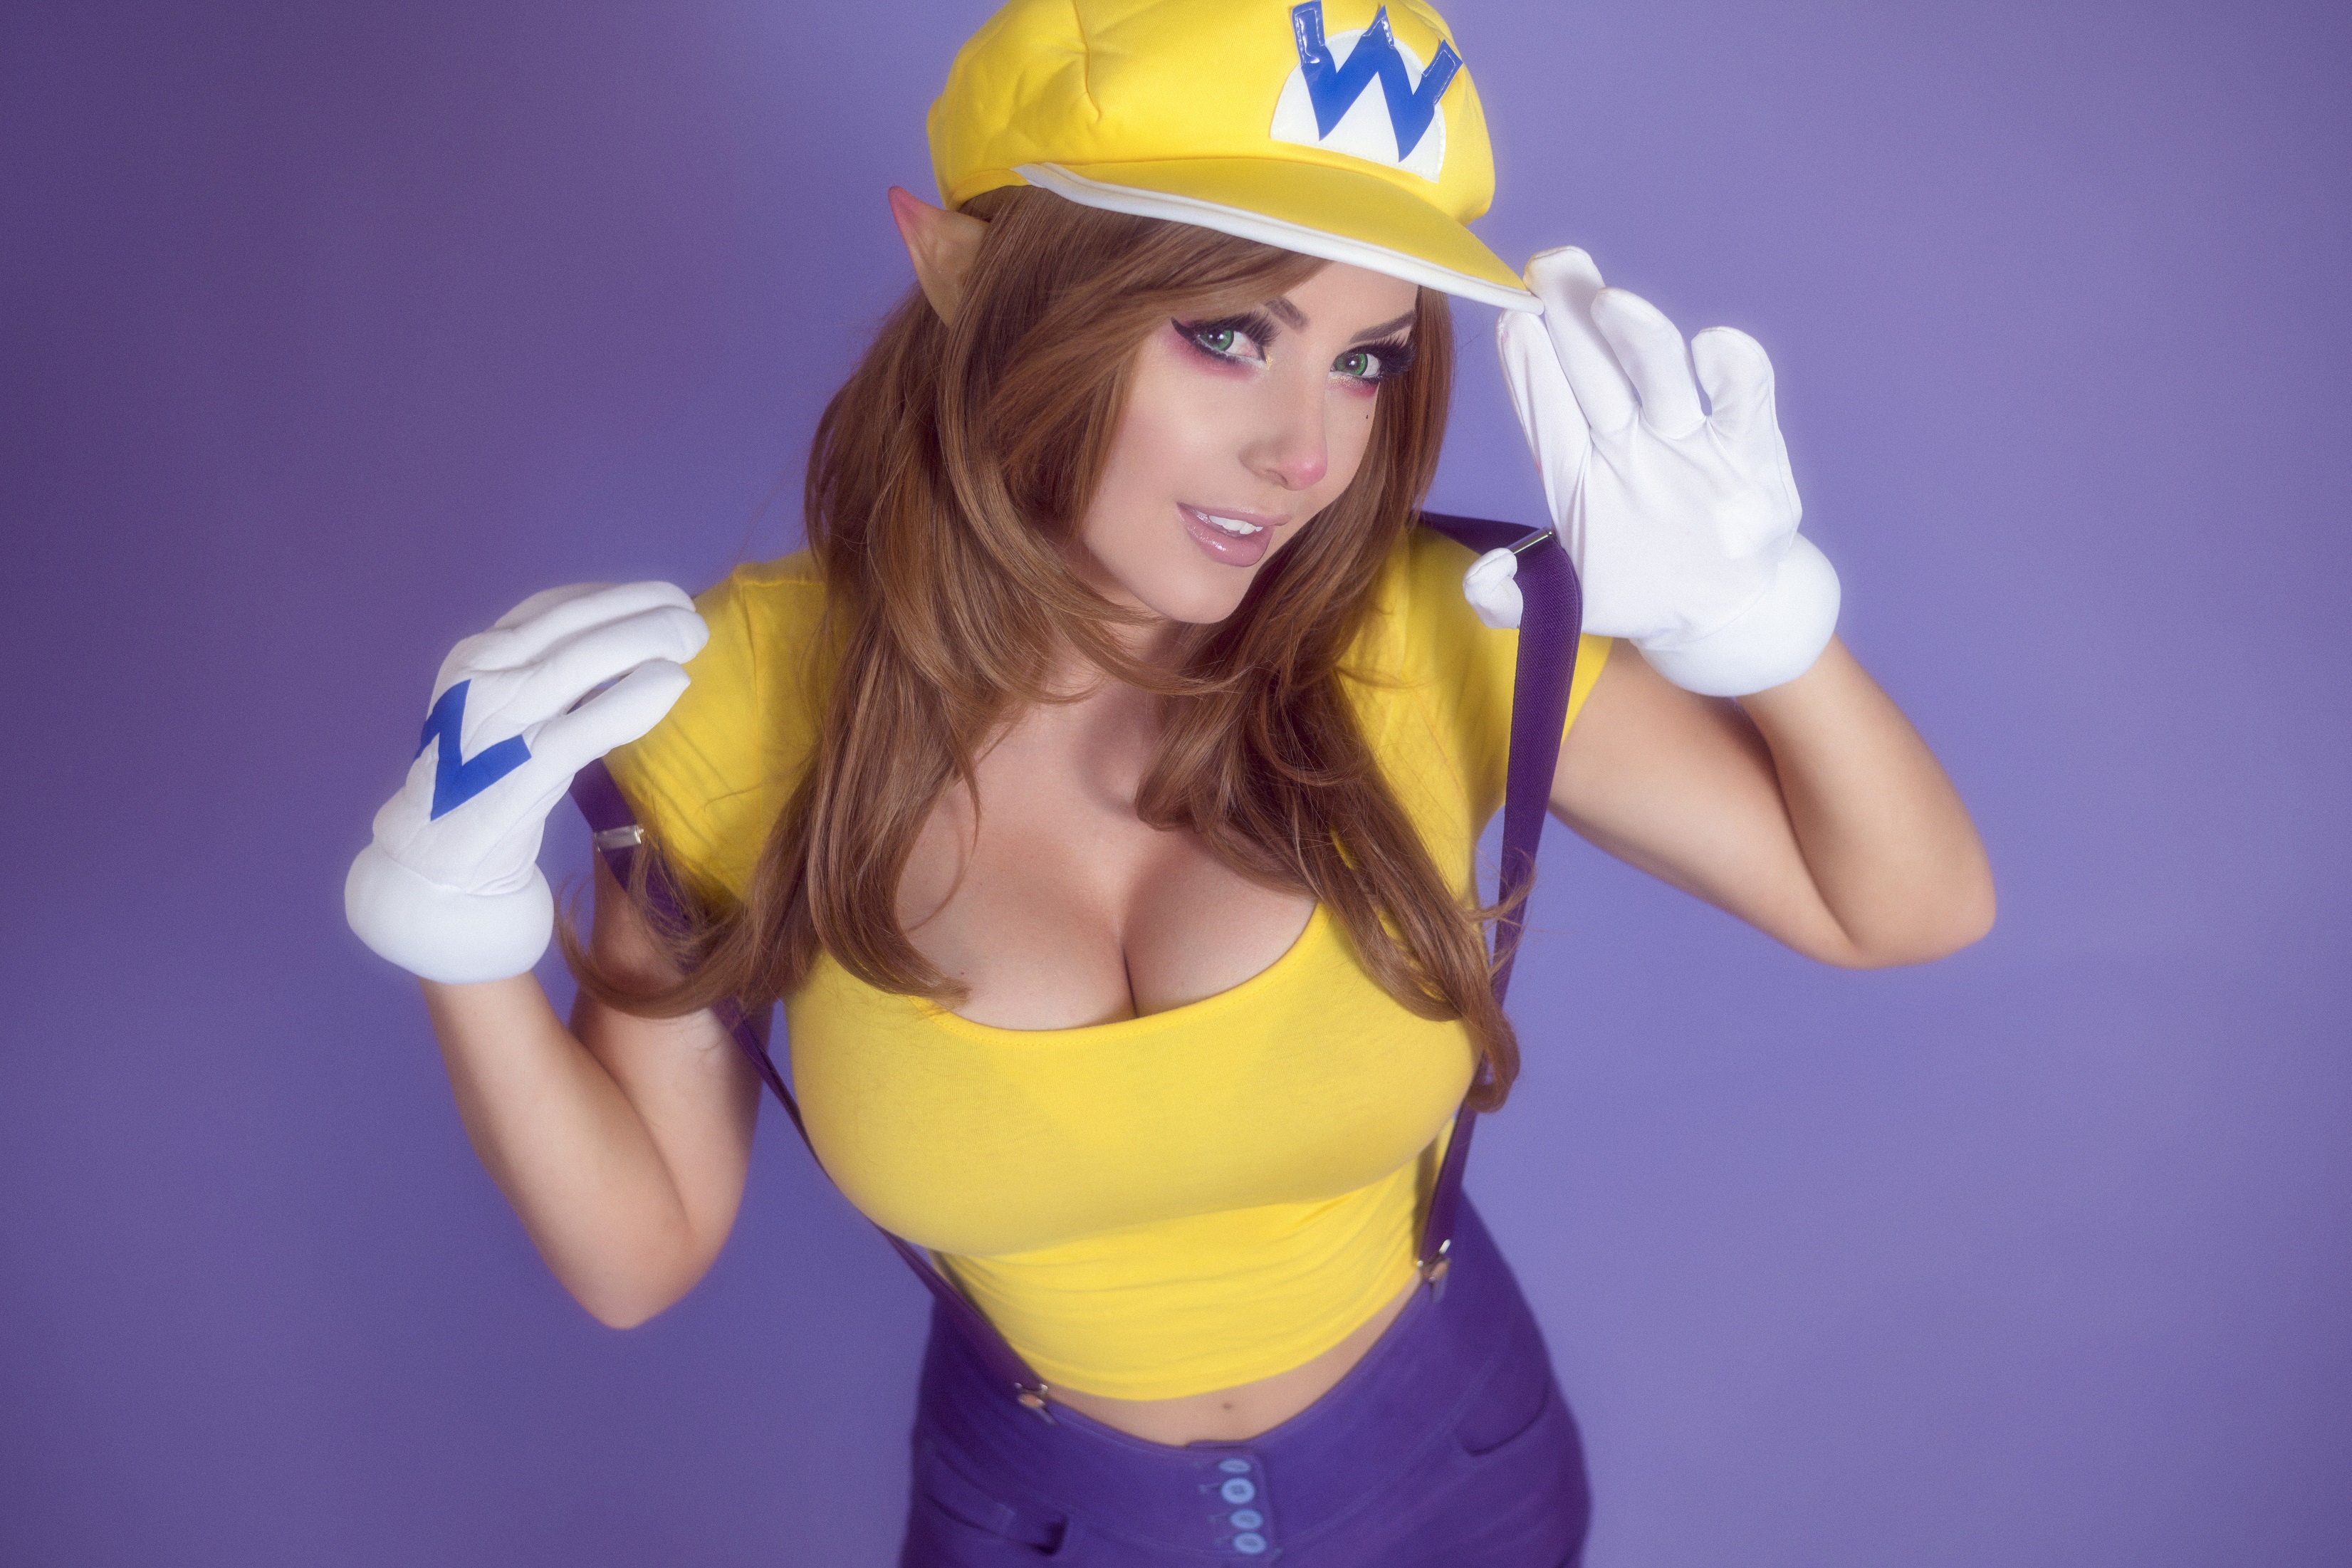 People 3303x2202 Jessica Nigri cosplay Wario Mario Bros. cleavage women yellow tops looking up gloves white gloves boobs big boobs video game girls costumes makeup pointy ears purple background women indoors studio model